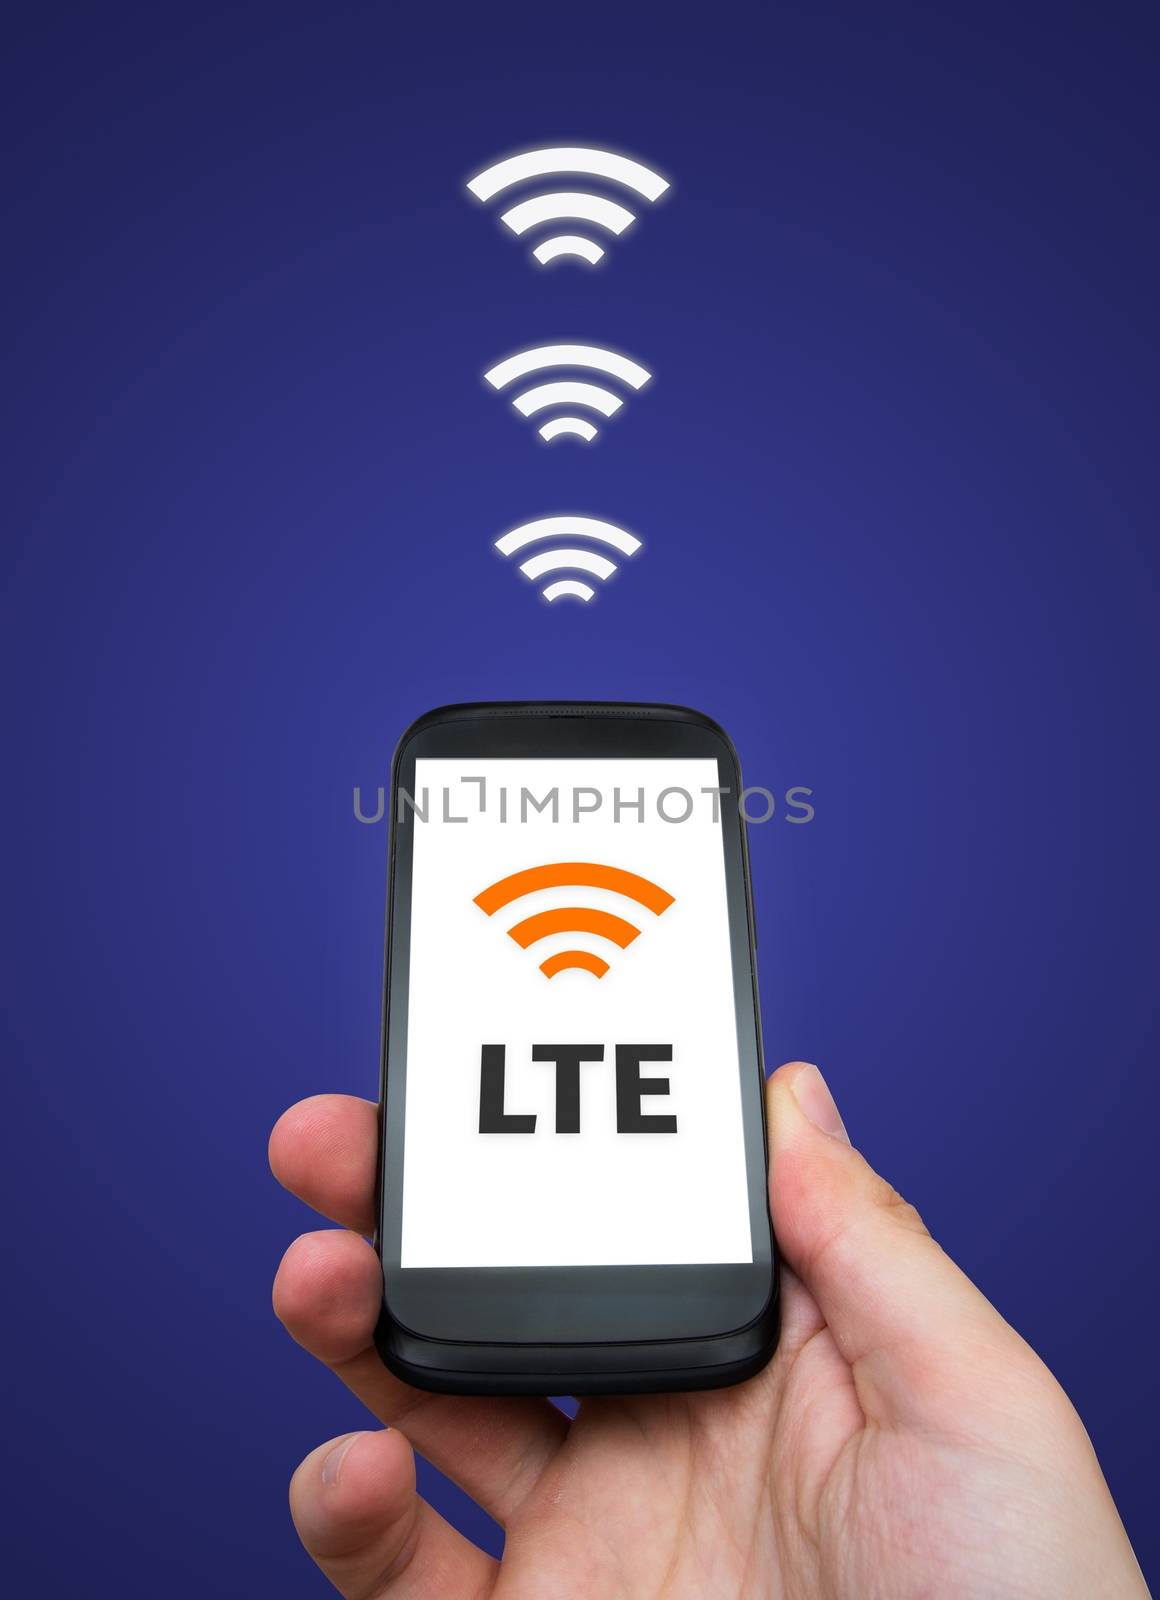 LTE high speed mobile internet connection by simpson33